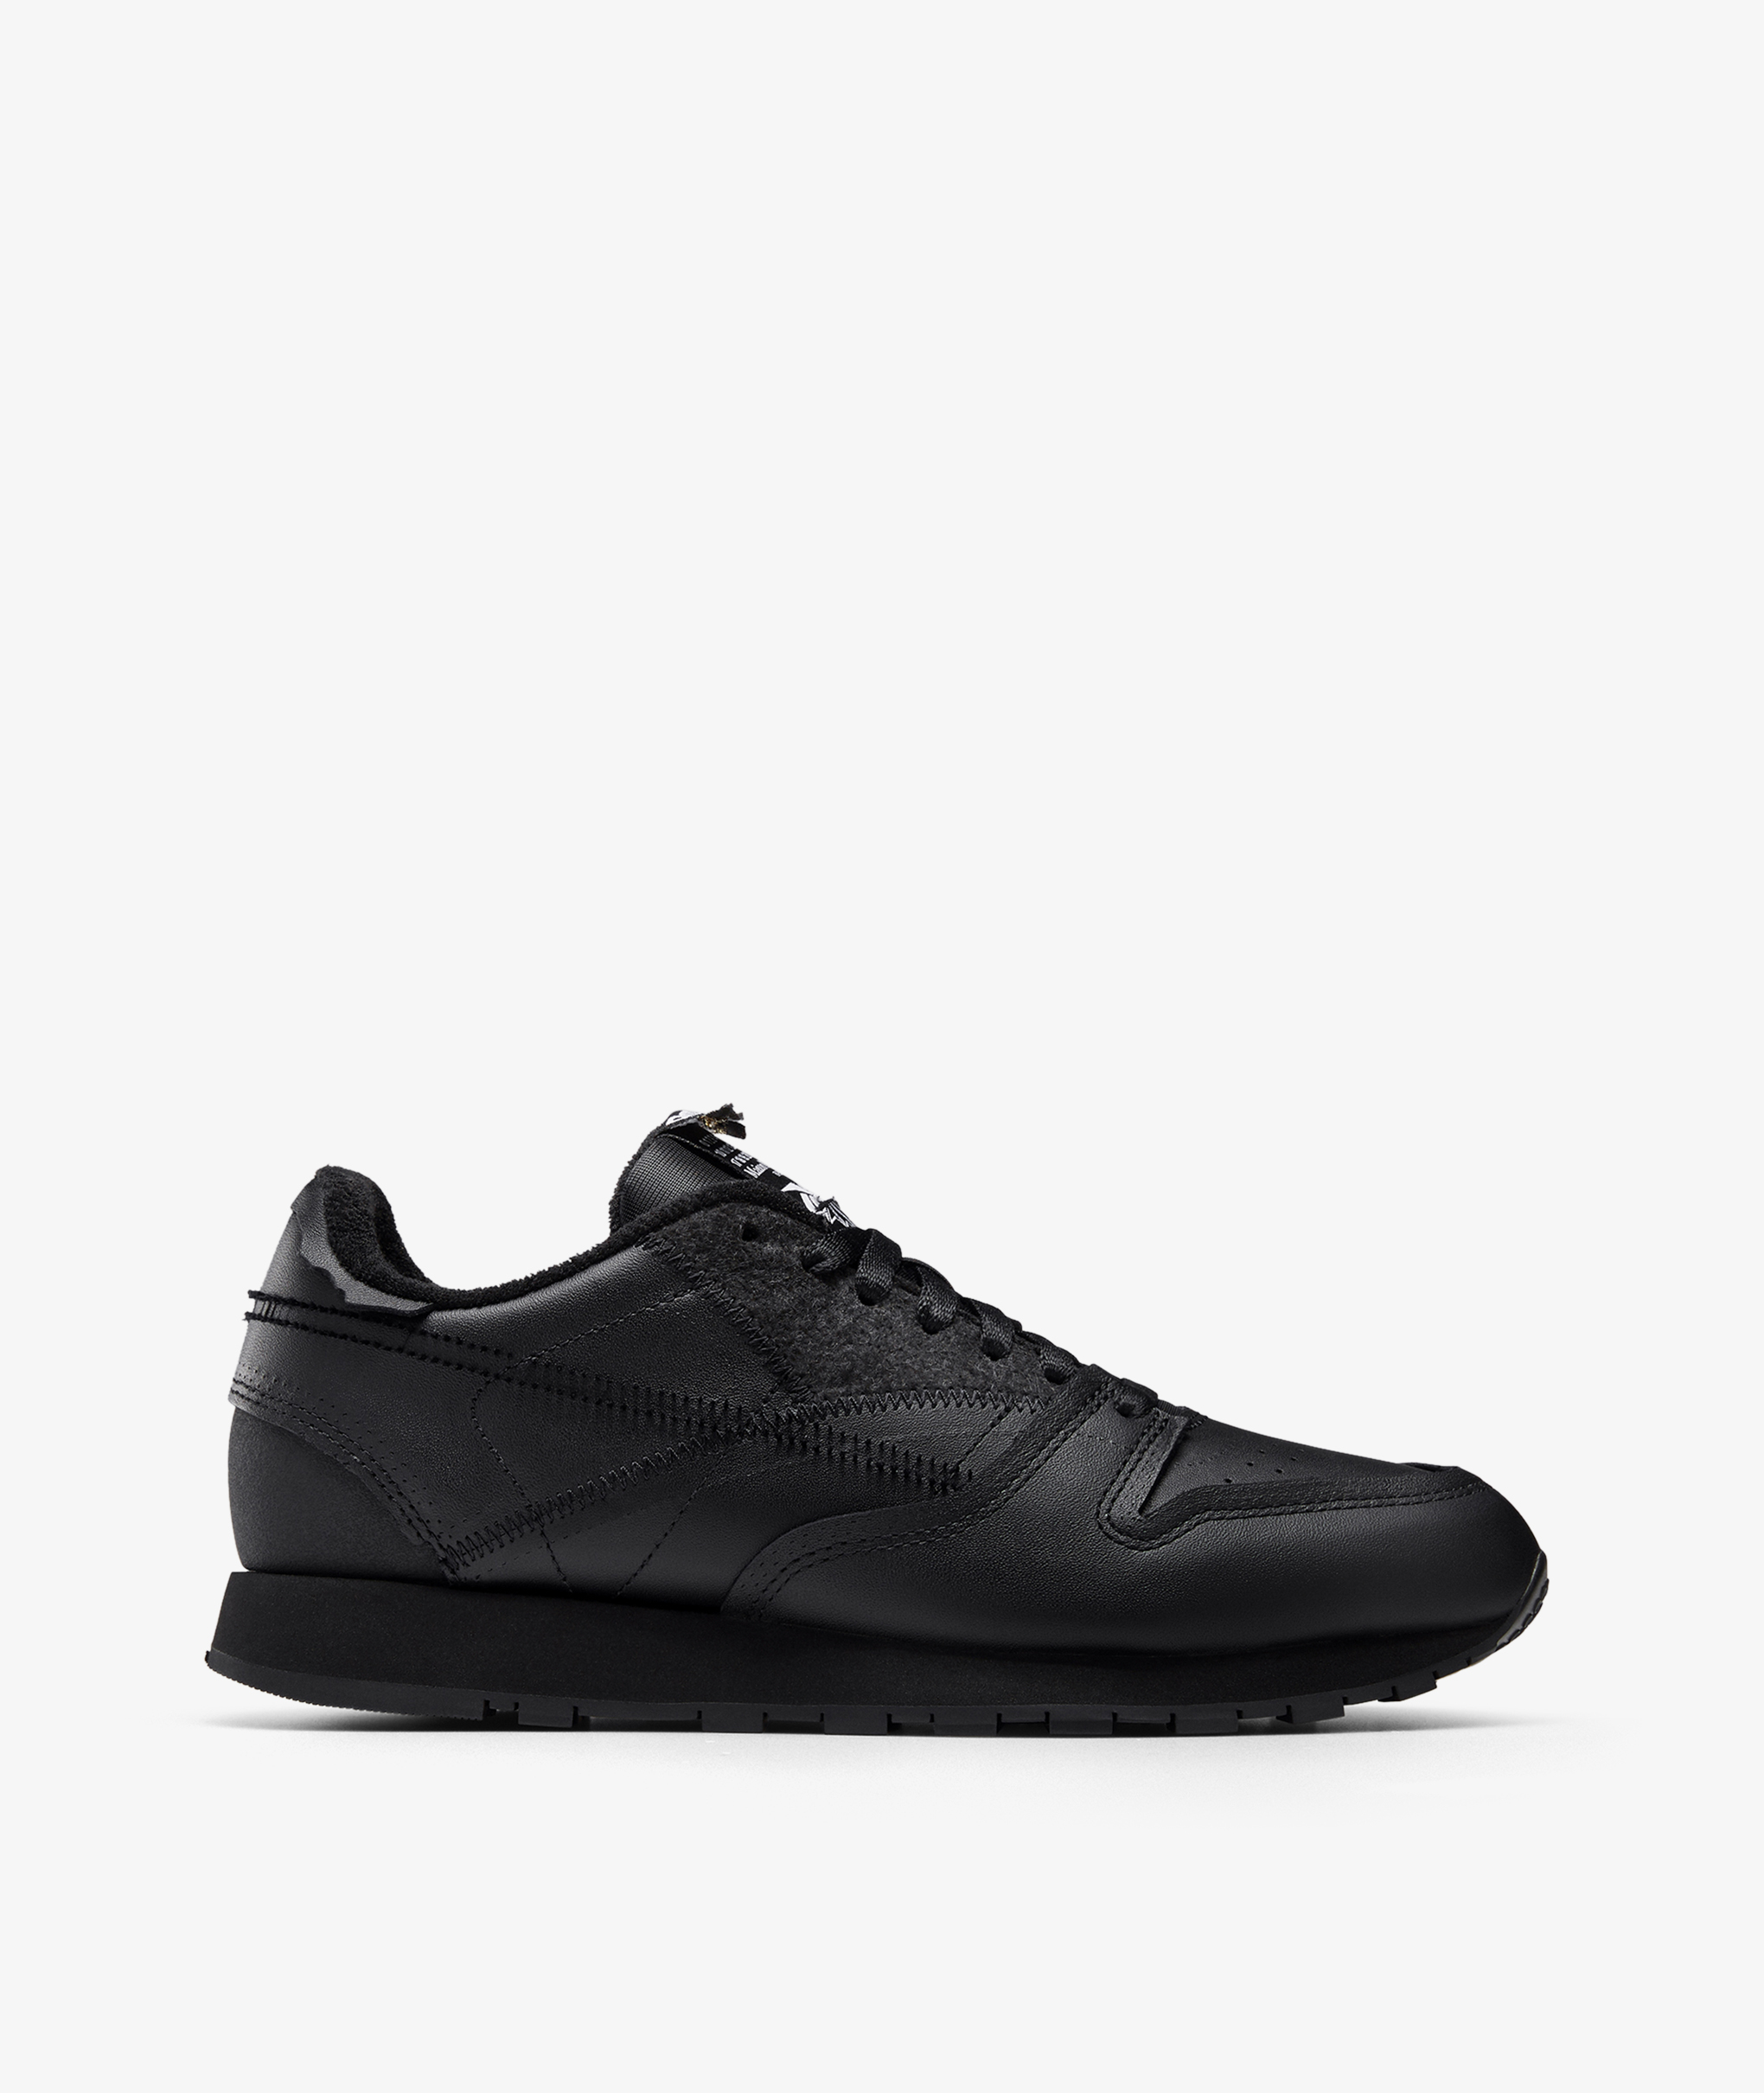 Store | Shipping Worldwide - Reebok MM6 Project 0 CL MO - Black